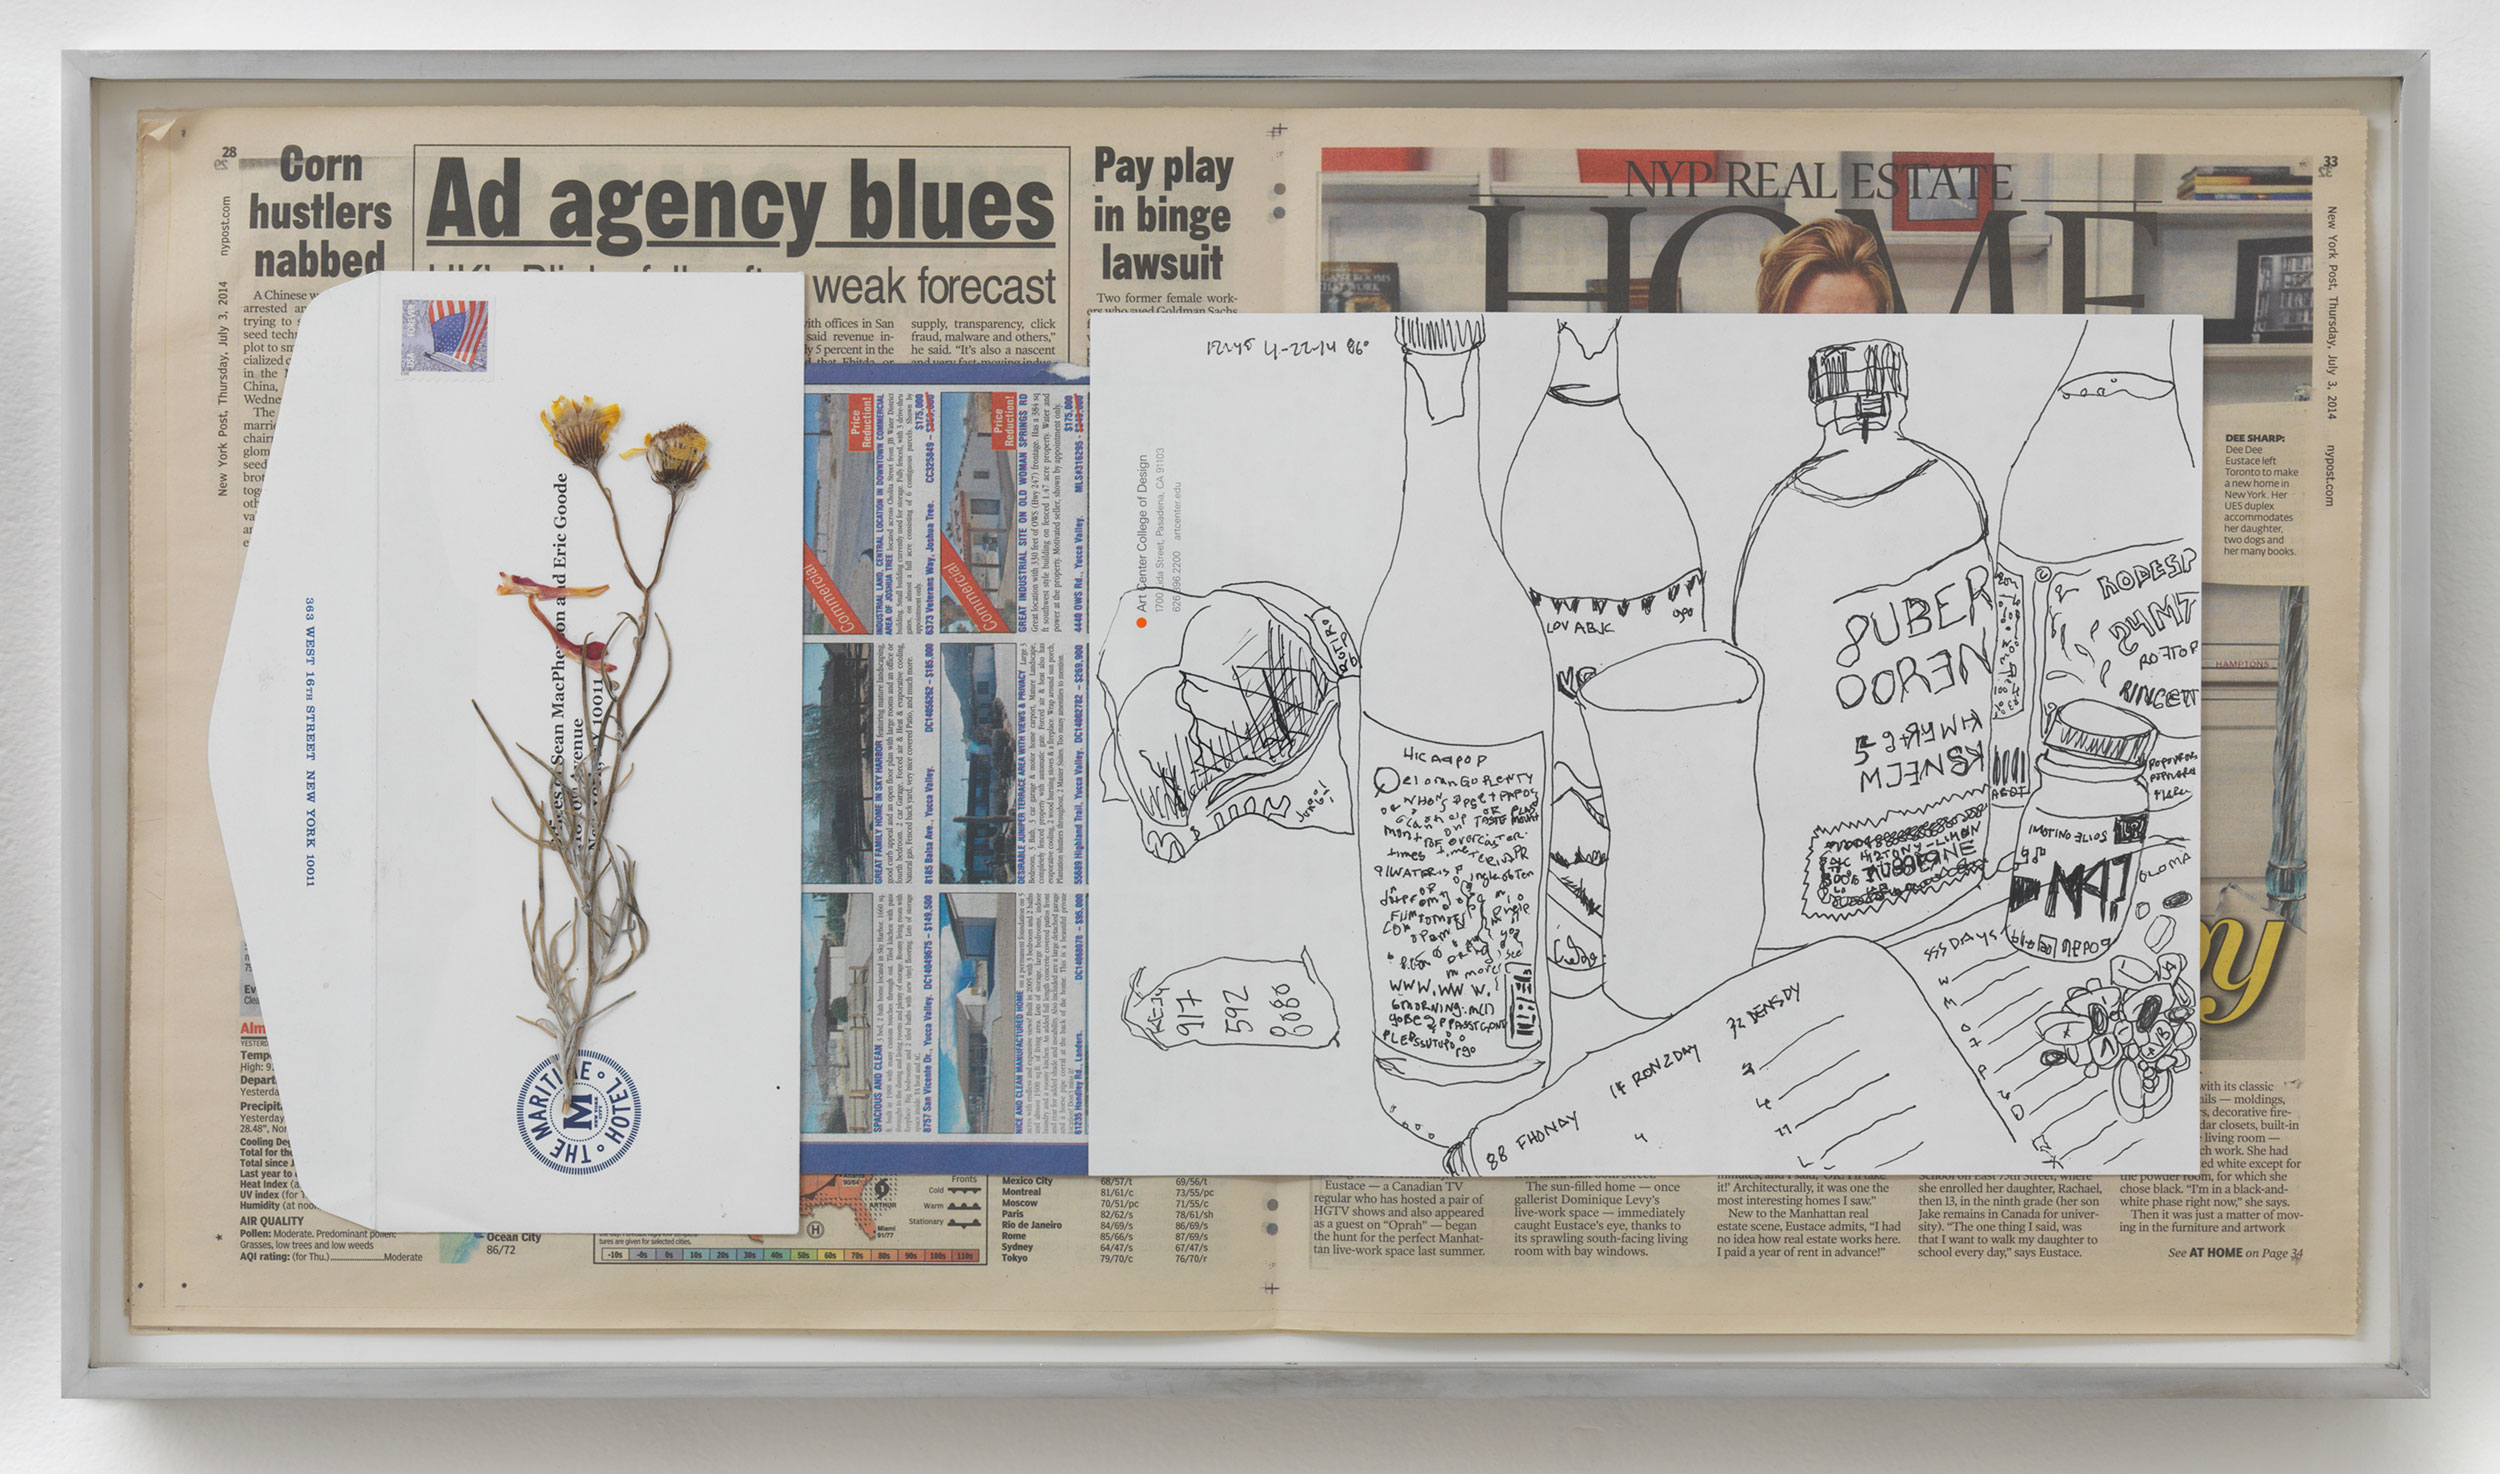   Corn Hustlers Nabbed; Ad Agency Blues: Pay Play in binge lawsuit, 86º, 2:45pm, 22-4-14    2014   Ink on paper, envelope, dried flower, newspaper  12 x 22 inches   Gastarbeiten, 2014     